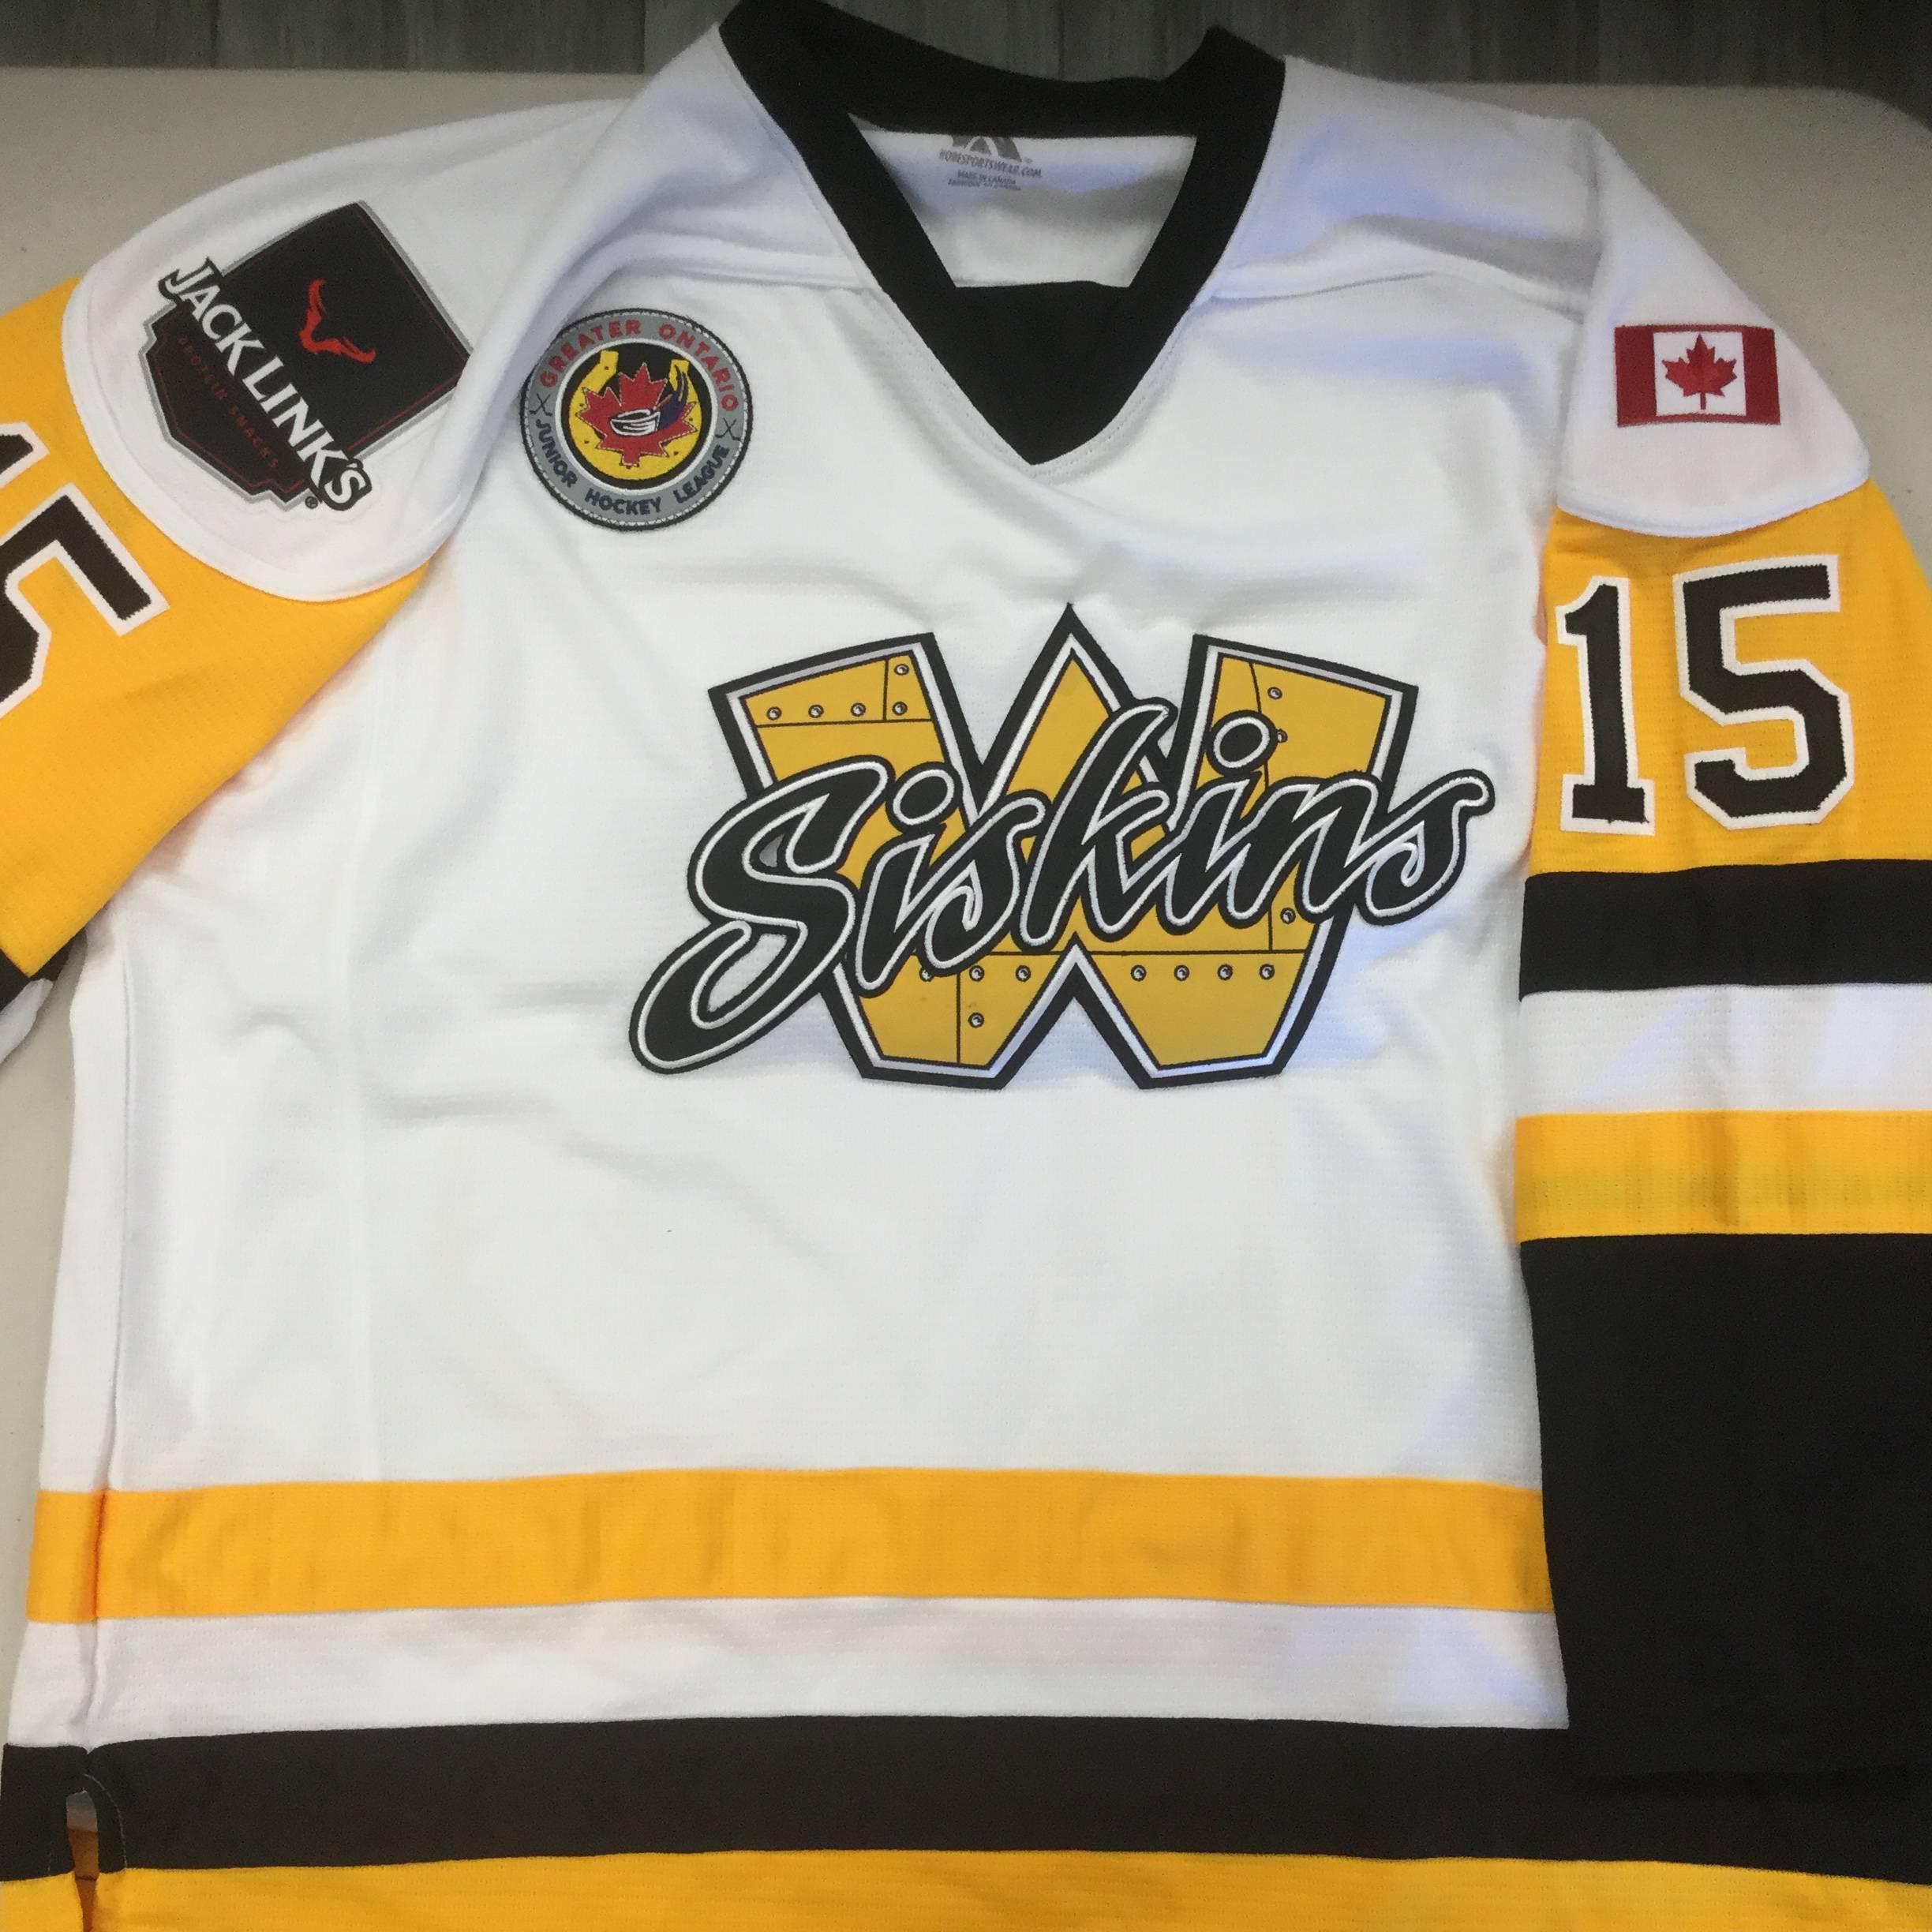 The Best Jerseys in Jersey: Your picks & ours for HS hockey's top sweaters  in 2021 